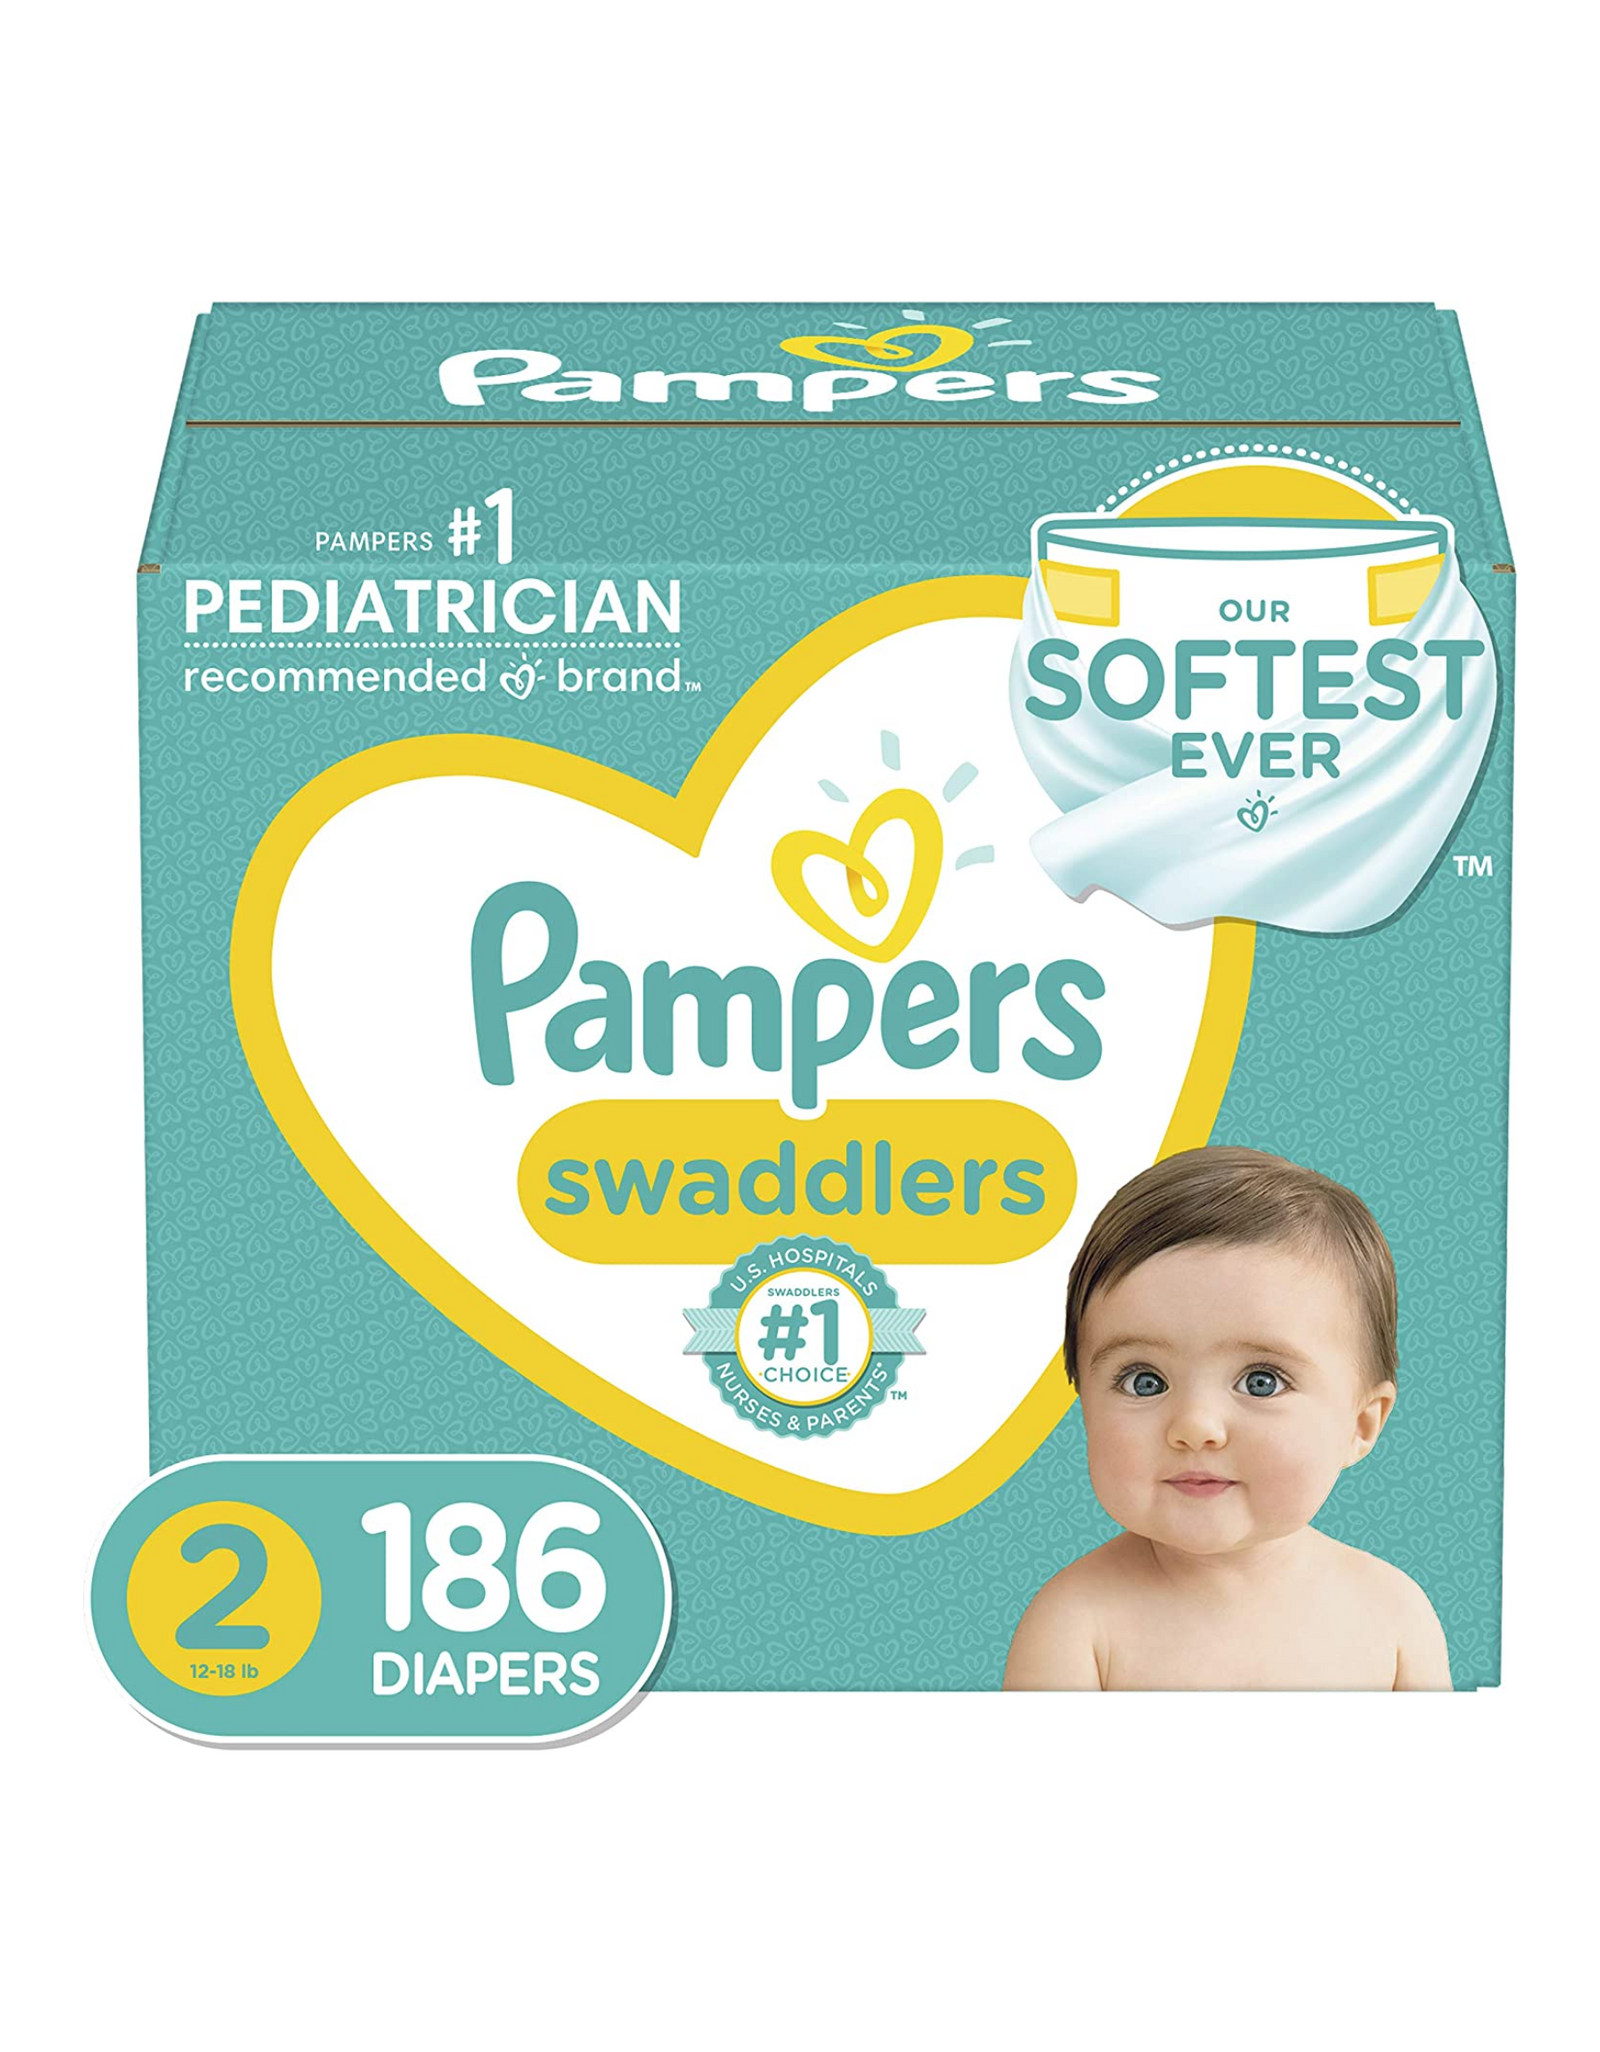 Diapers Size 2, 186 Count - Pampers Swaddlers Baby Diapers, One Month Supply (Packaging May Vary)